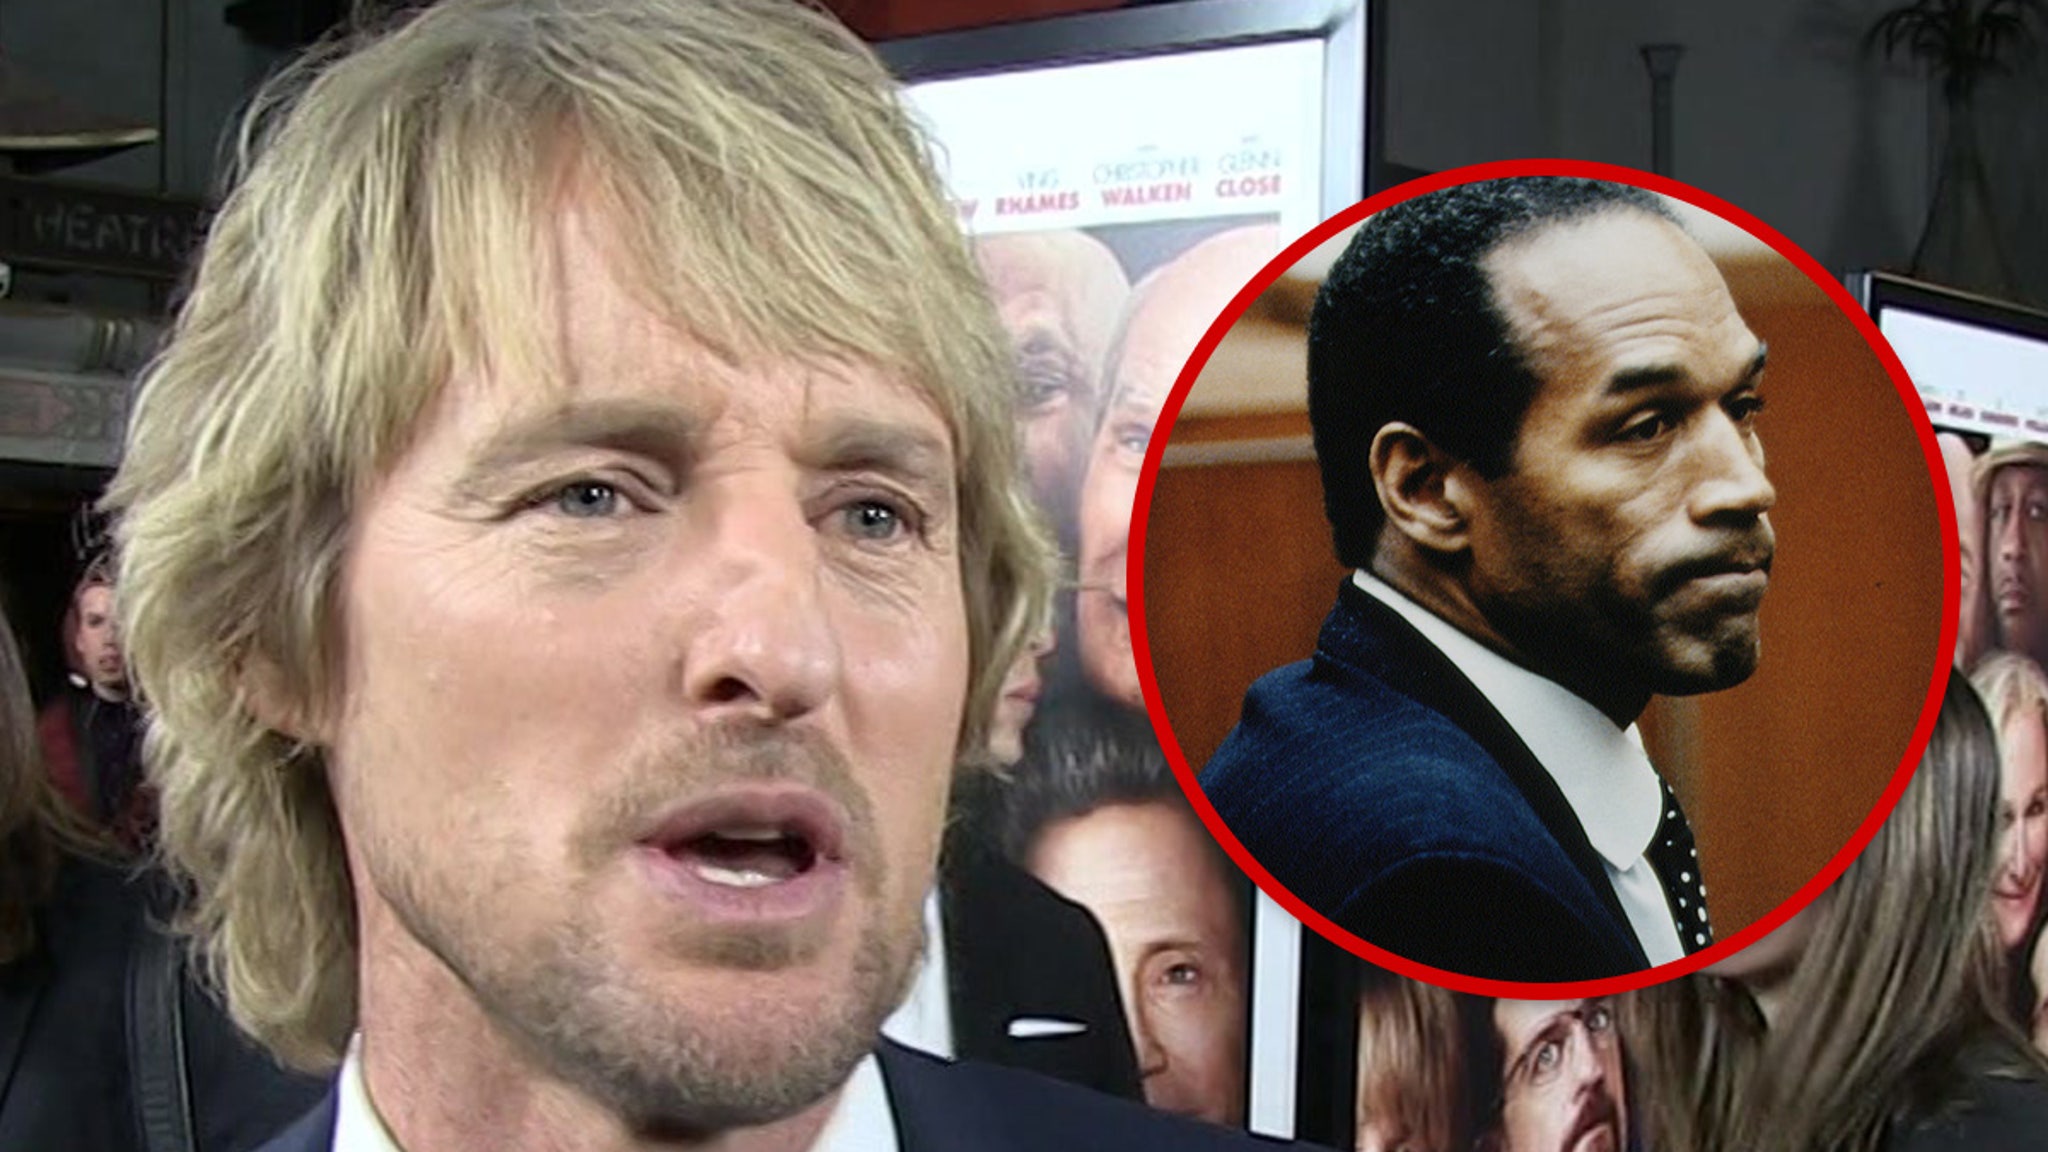 Owen Wilson Turned Down Role in Film Painting O.J. Simpson as Innocent